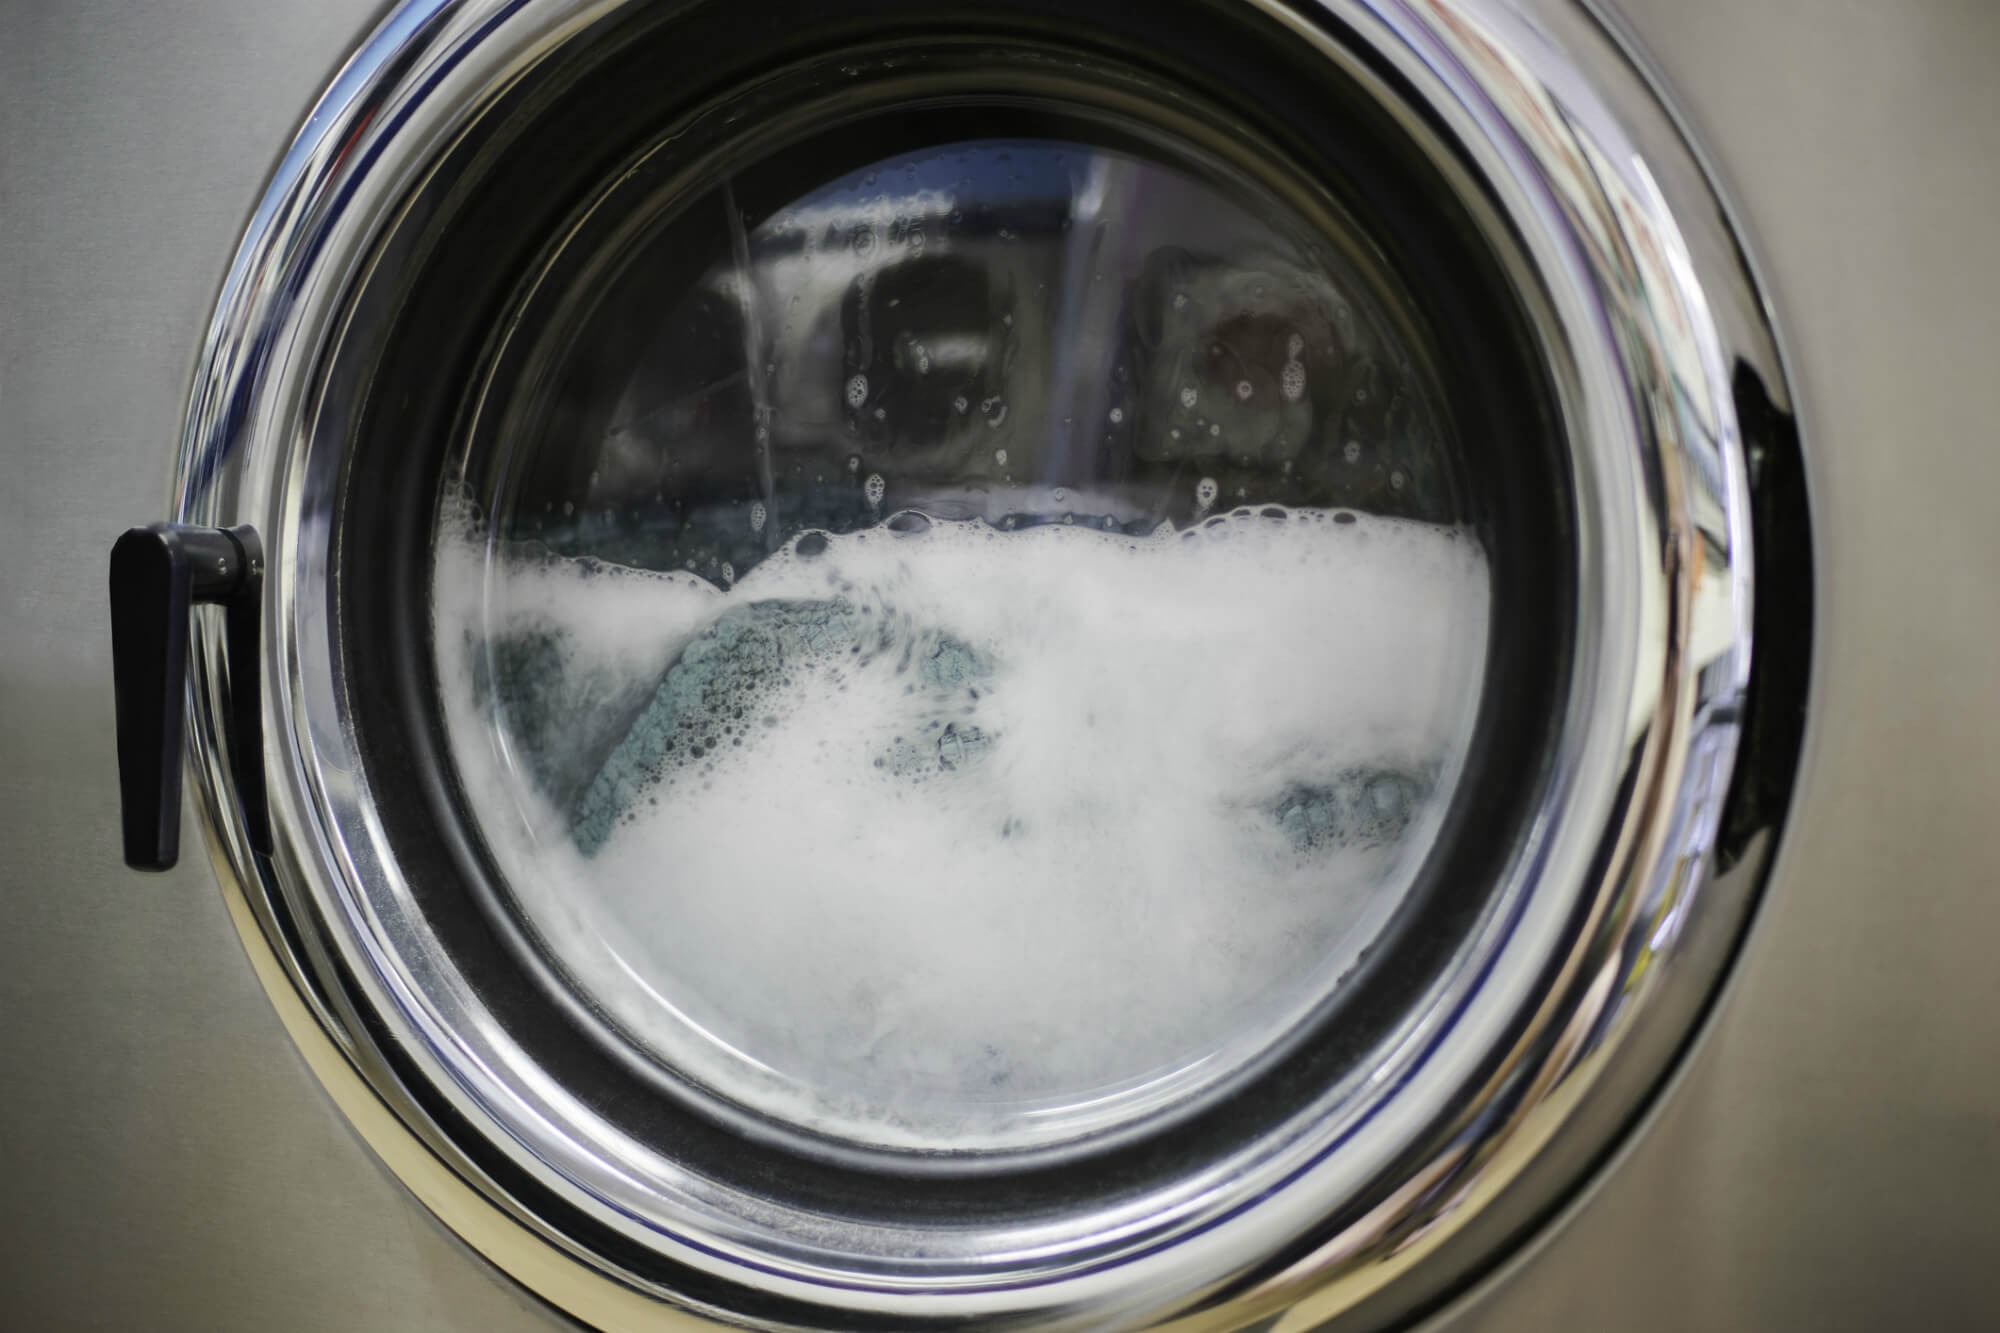 Can I use regular detergent to clean FR clothing?